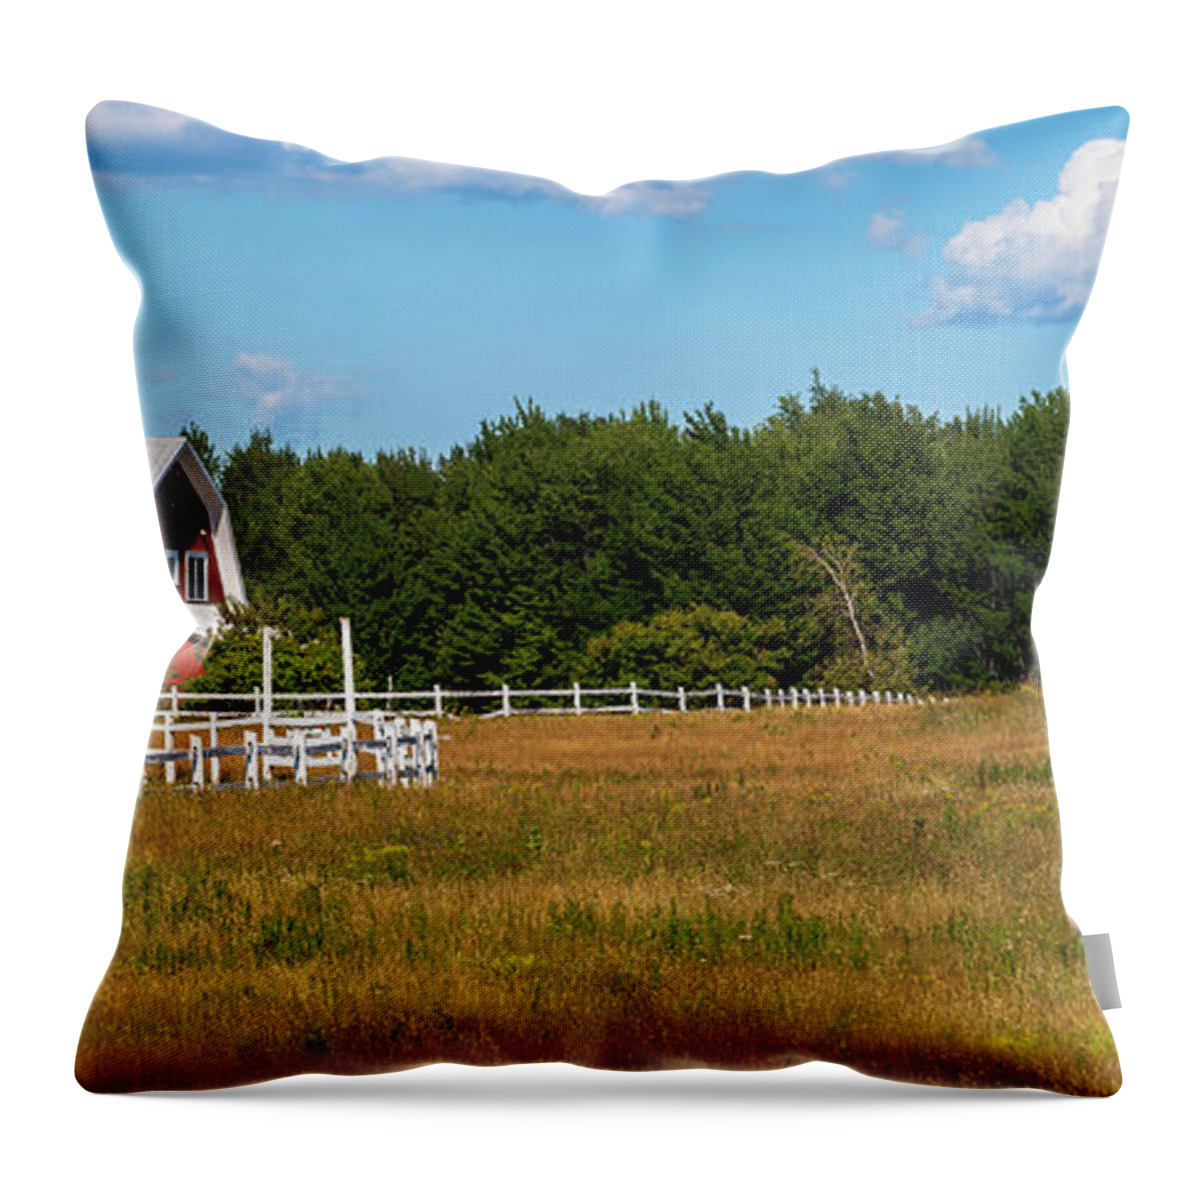 Photography Throw Pillow featuring the photograph Red Barn In Meadow, Knowlton, Quebec by Panoramic Images